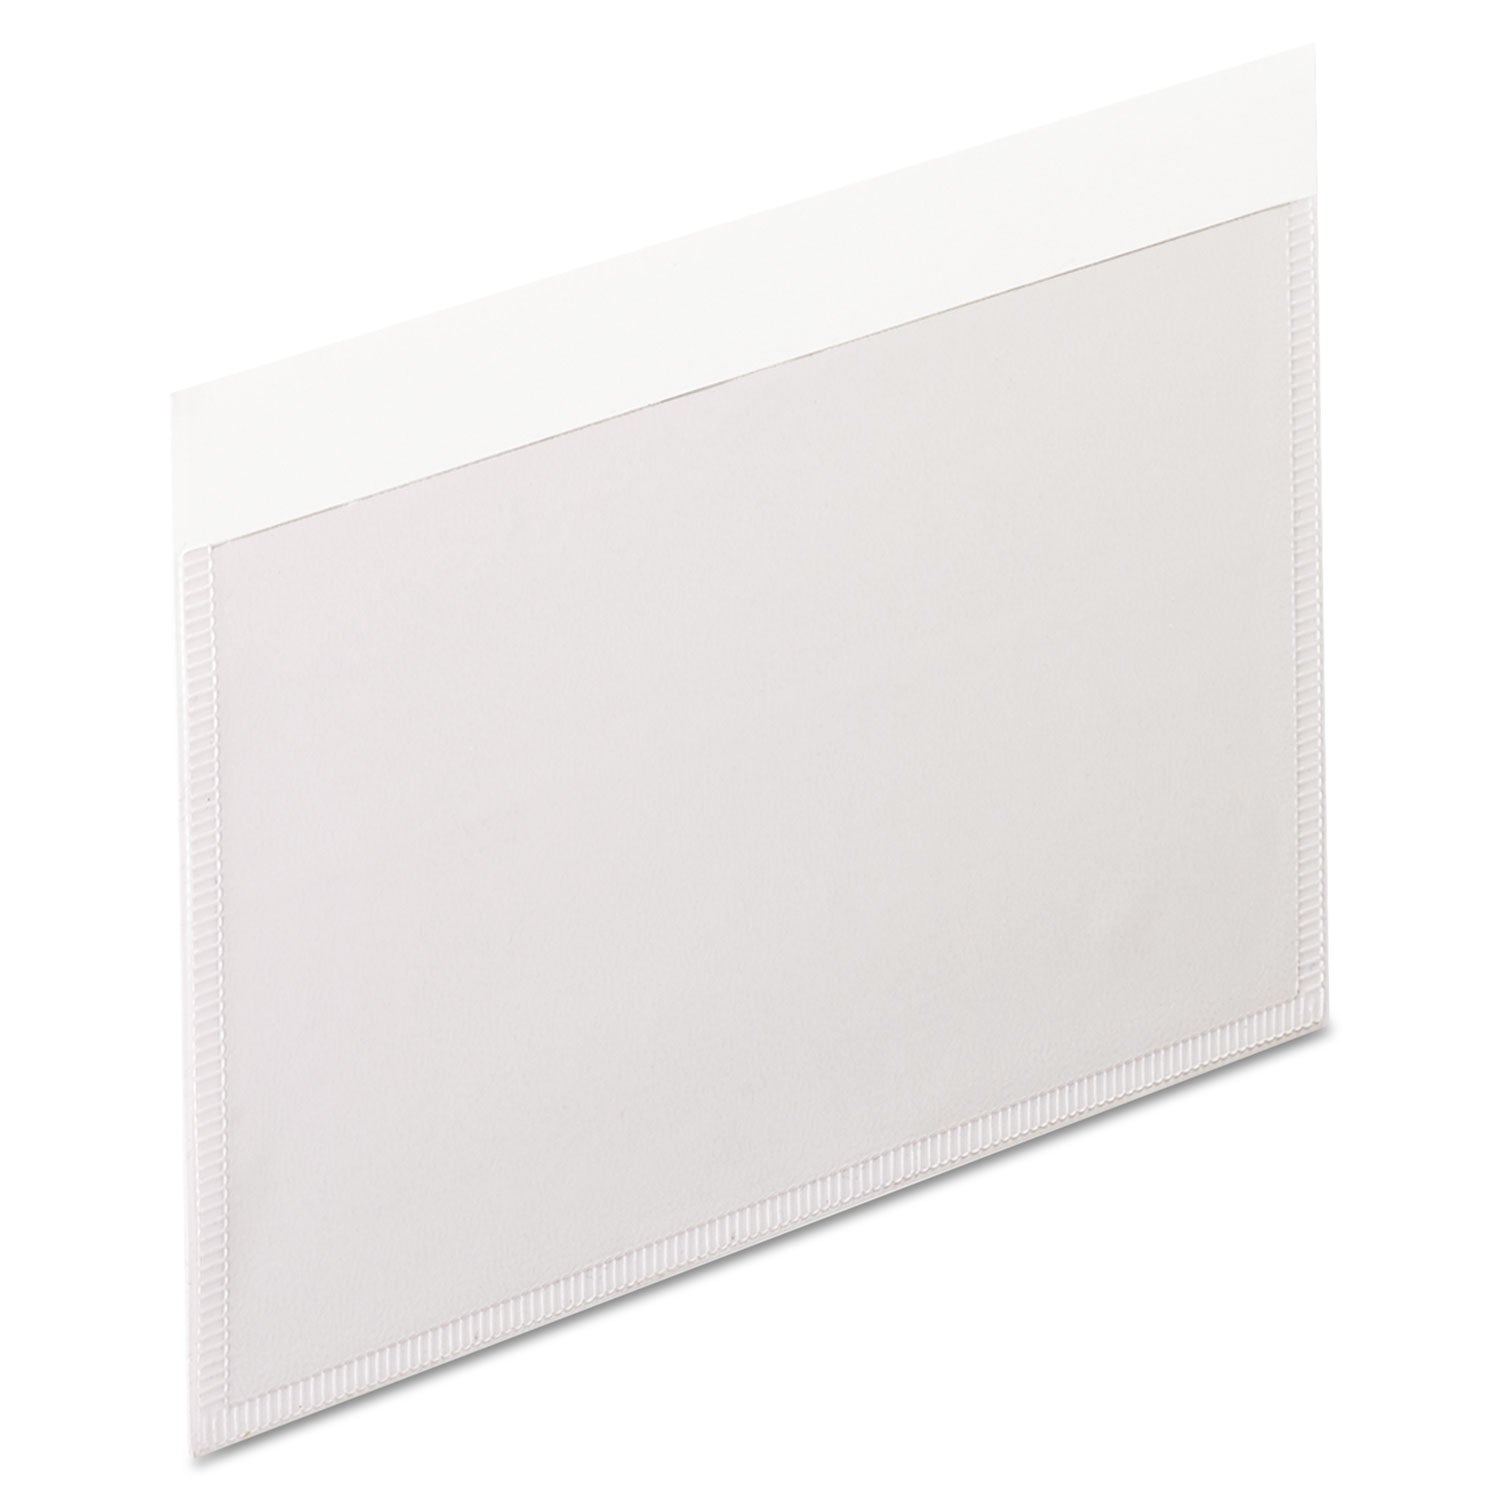 self-adhesive-pockets-3-x-5-clear-front-white-backing-100-box_pfx99375 - 1